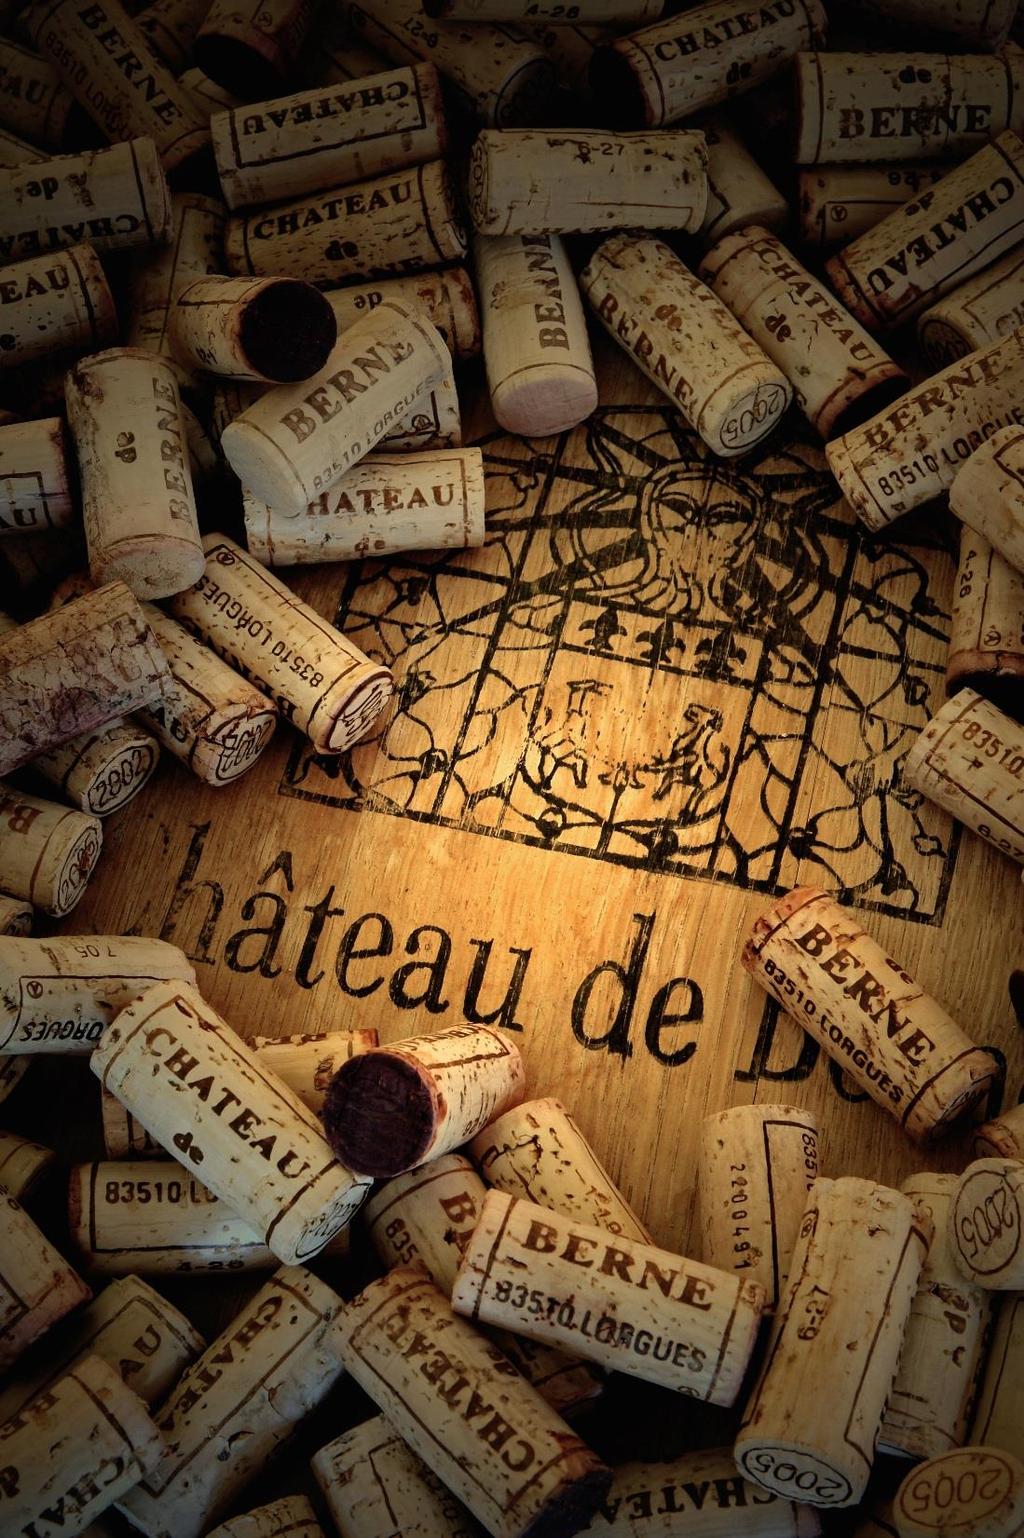 Deeply committed to quality, Château de Berne is planted with 277 acres of vines producing Côtes de Provence AOP (Protected Designation of Origin) wines.